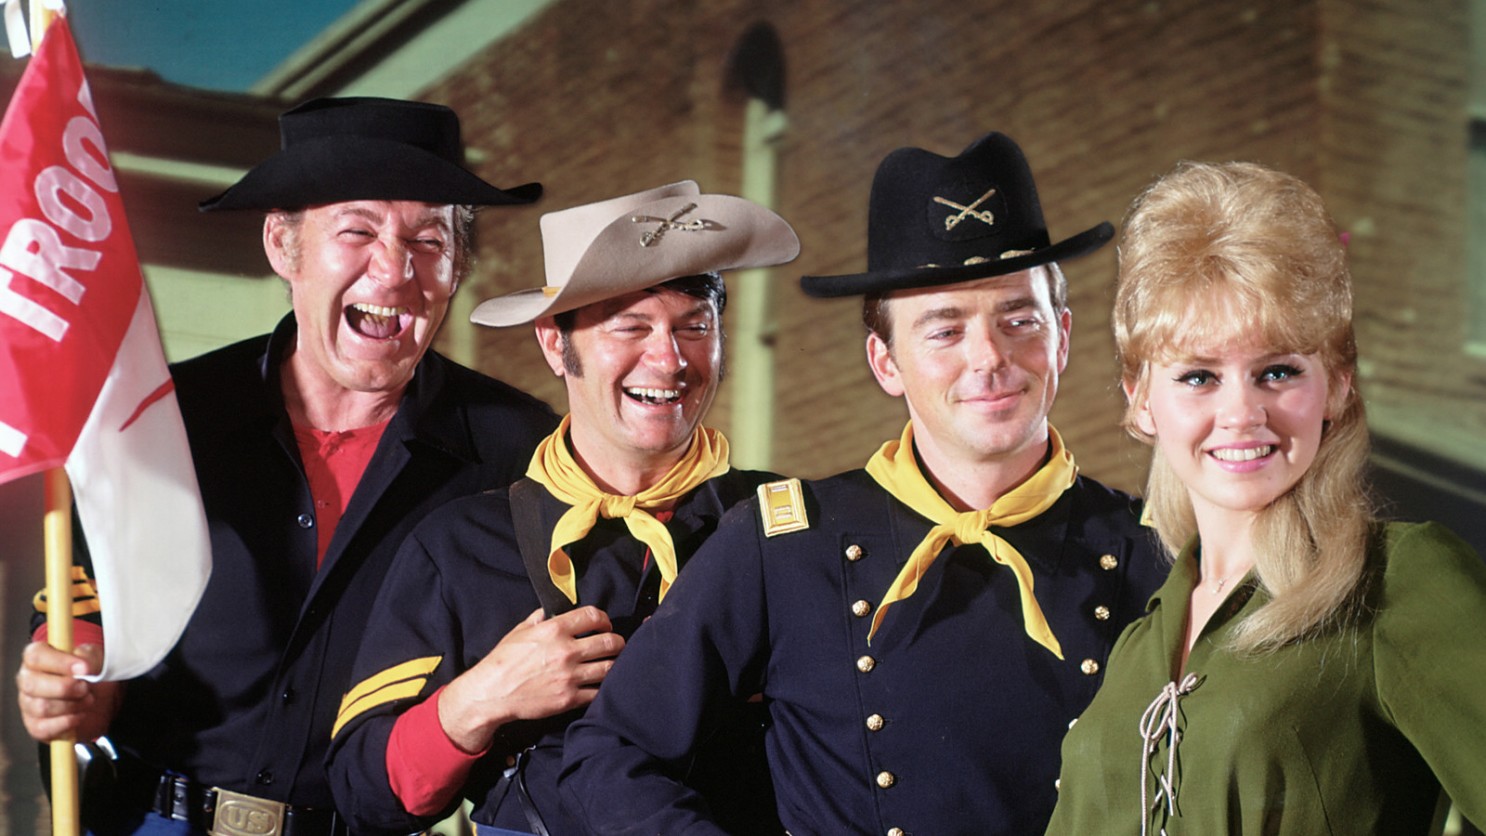 If You Know 14/20 of These All-Time Favorite TV Shows, Then You Must Be a Classic TV Lover F Troop